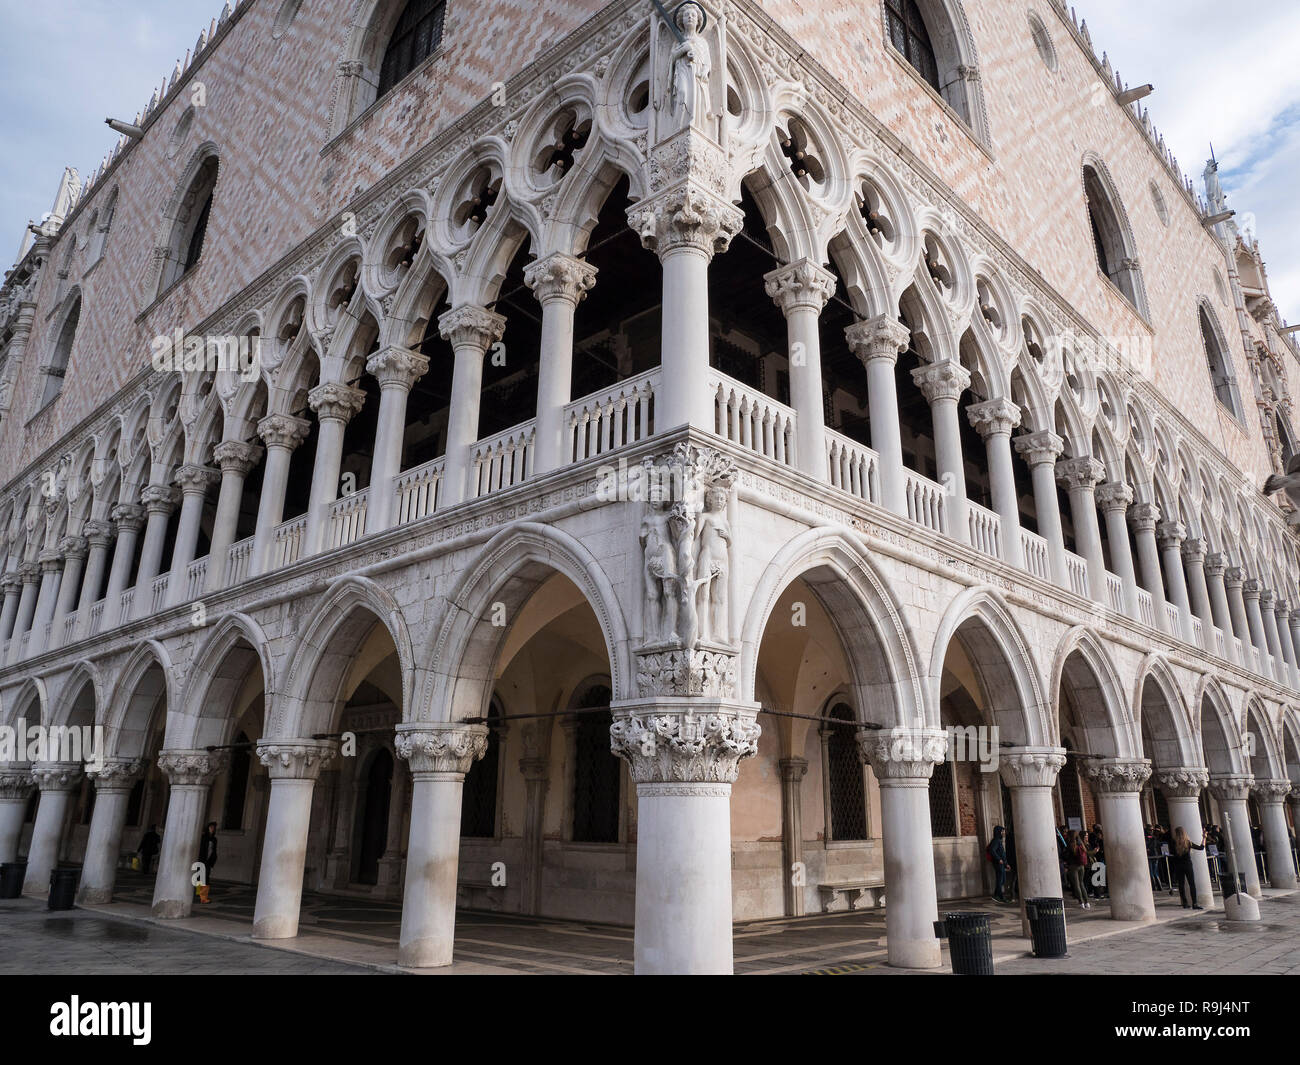 VENICE, ITALY, NOV 1st 2018: Doges Palace detailed facade or exterior perspective view. Ancient Italian renaissance architecture. Famous historic venetian landmark on San Marco Square or Piazza Nobody Stock Photo